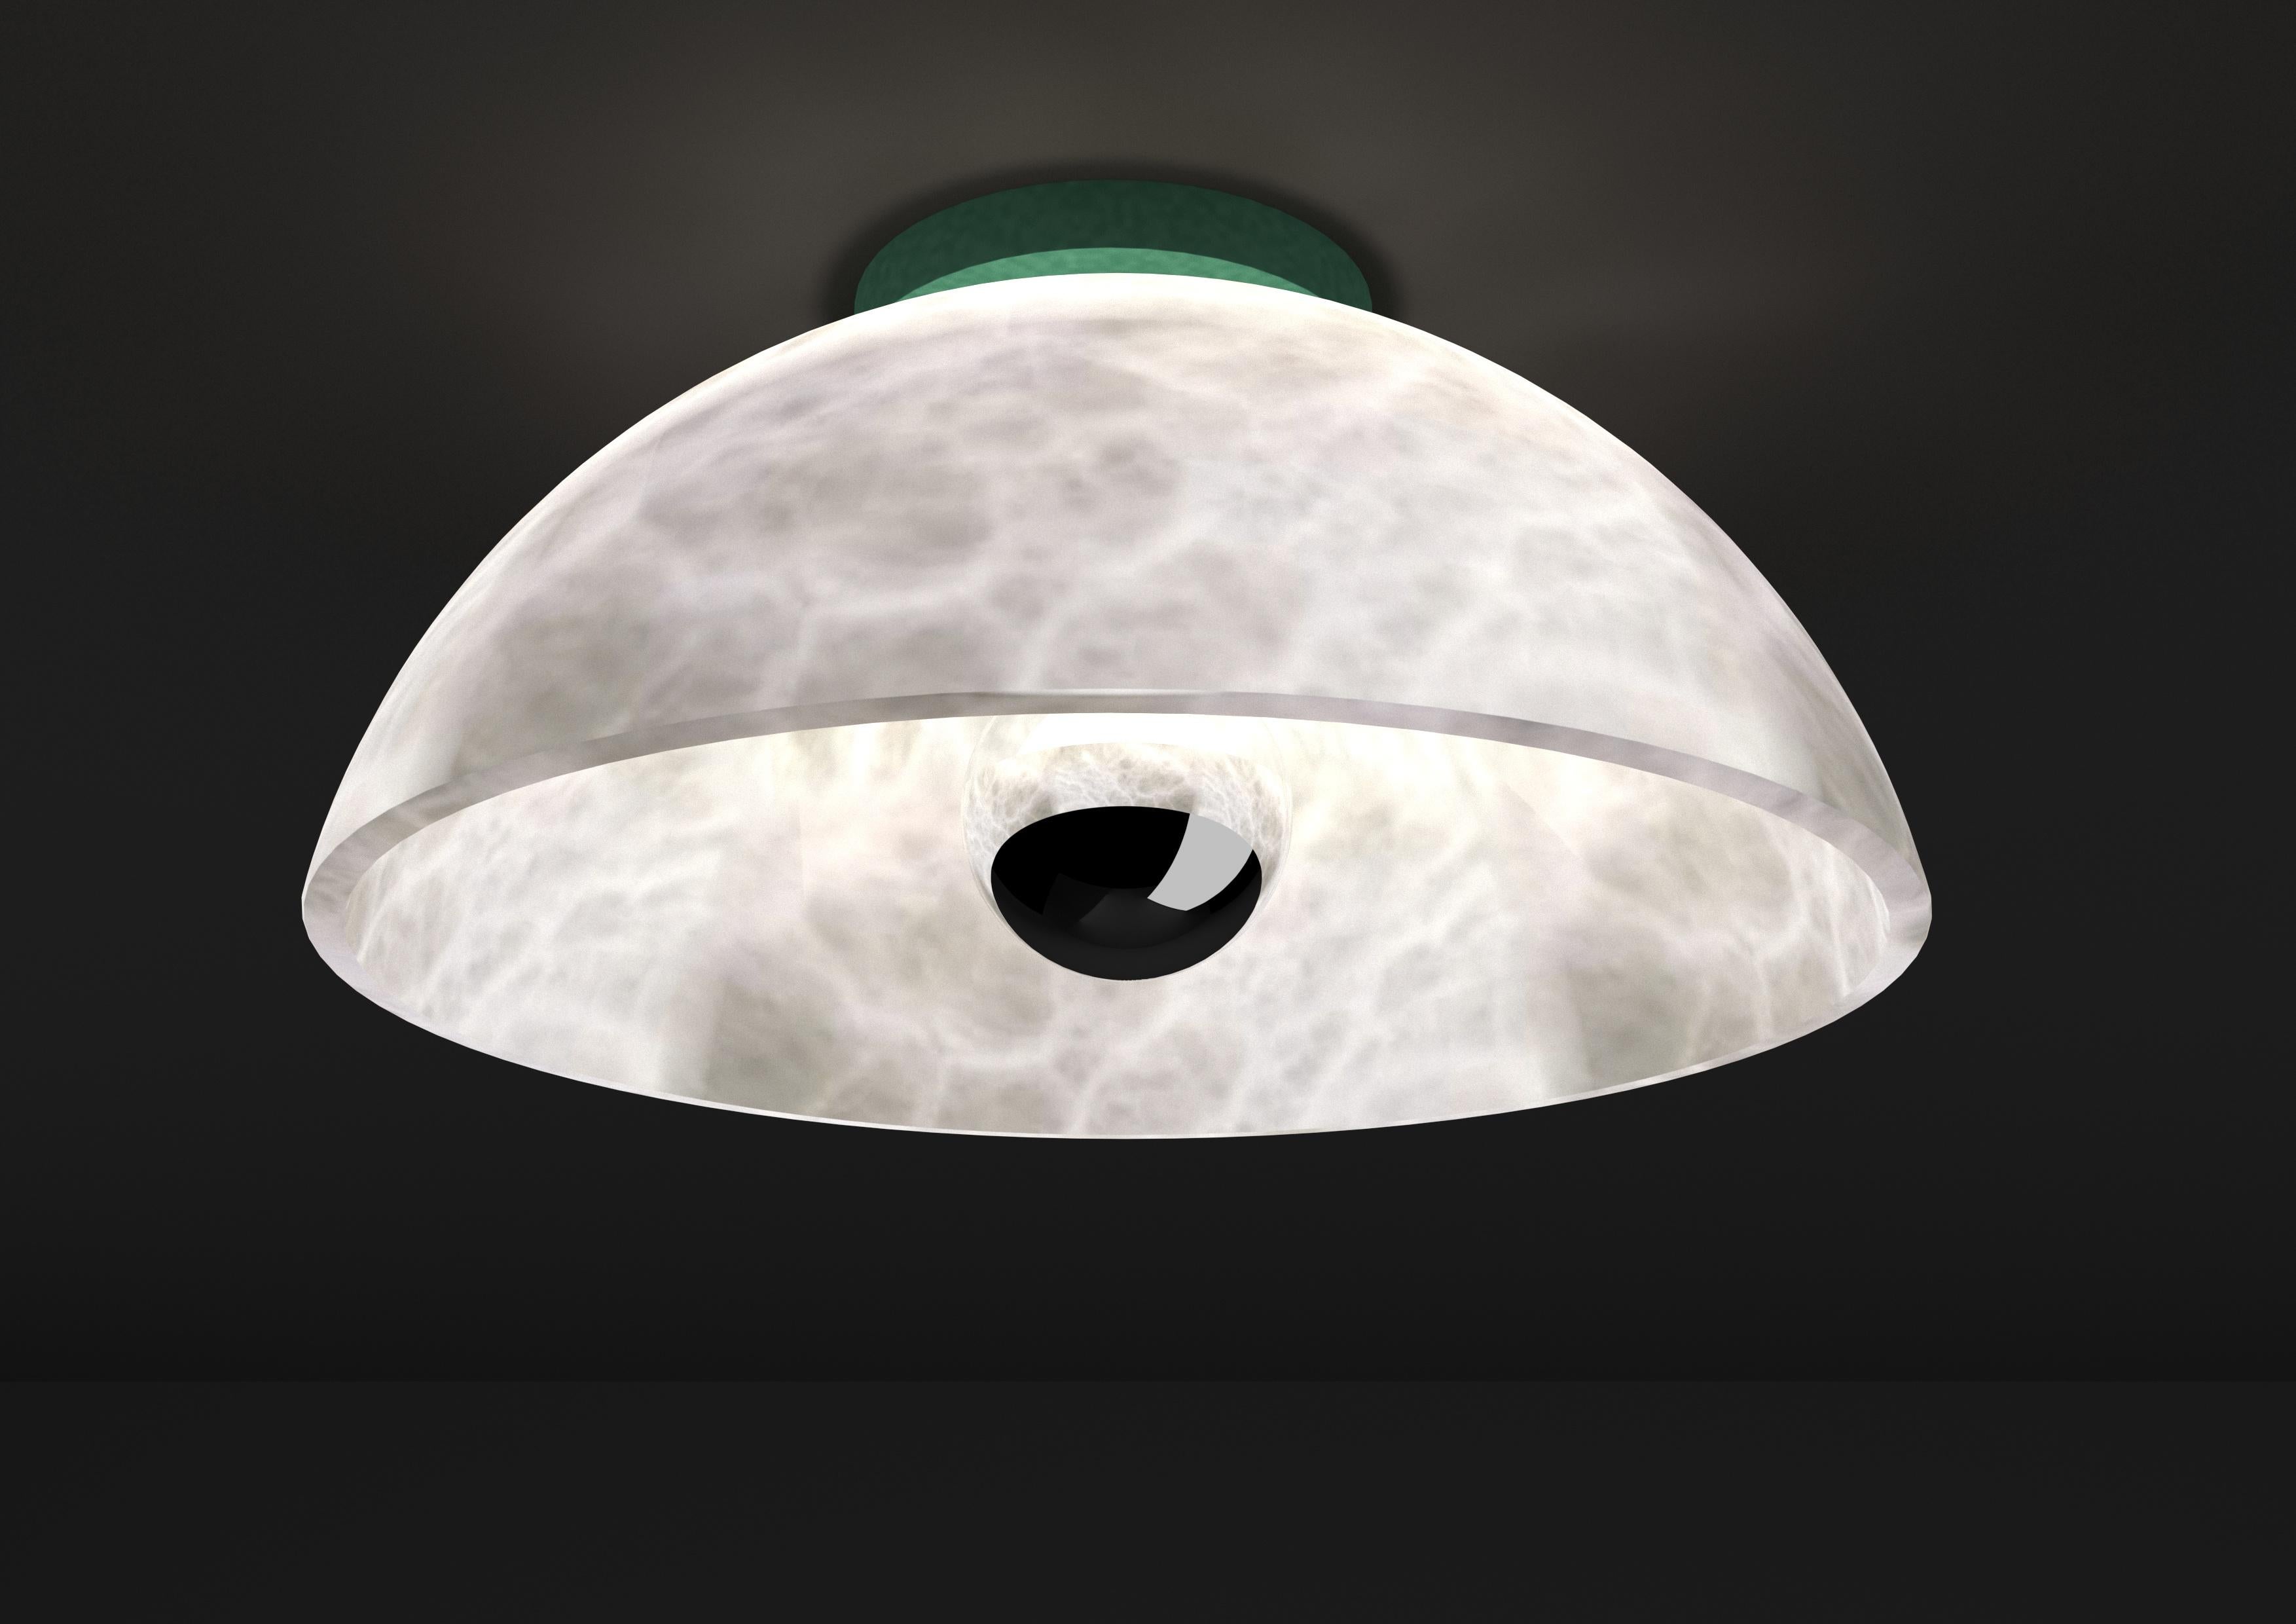 Apollo Freedom Green Metal Ceiling Lamp by Alabastro Italiano
Dimensions: Ø 30 x W 17,5 cm.
Materials: White alabaster and metal.

Available in different finishes: Shiny Silver, Bronze, Brushed Brass, Ruggine of Florence, Brushed Burnished, Shiny